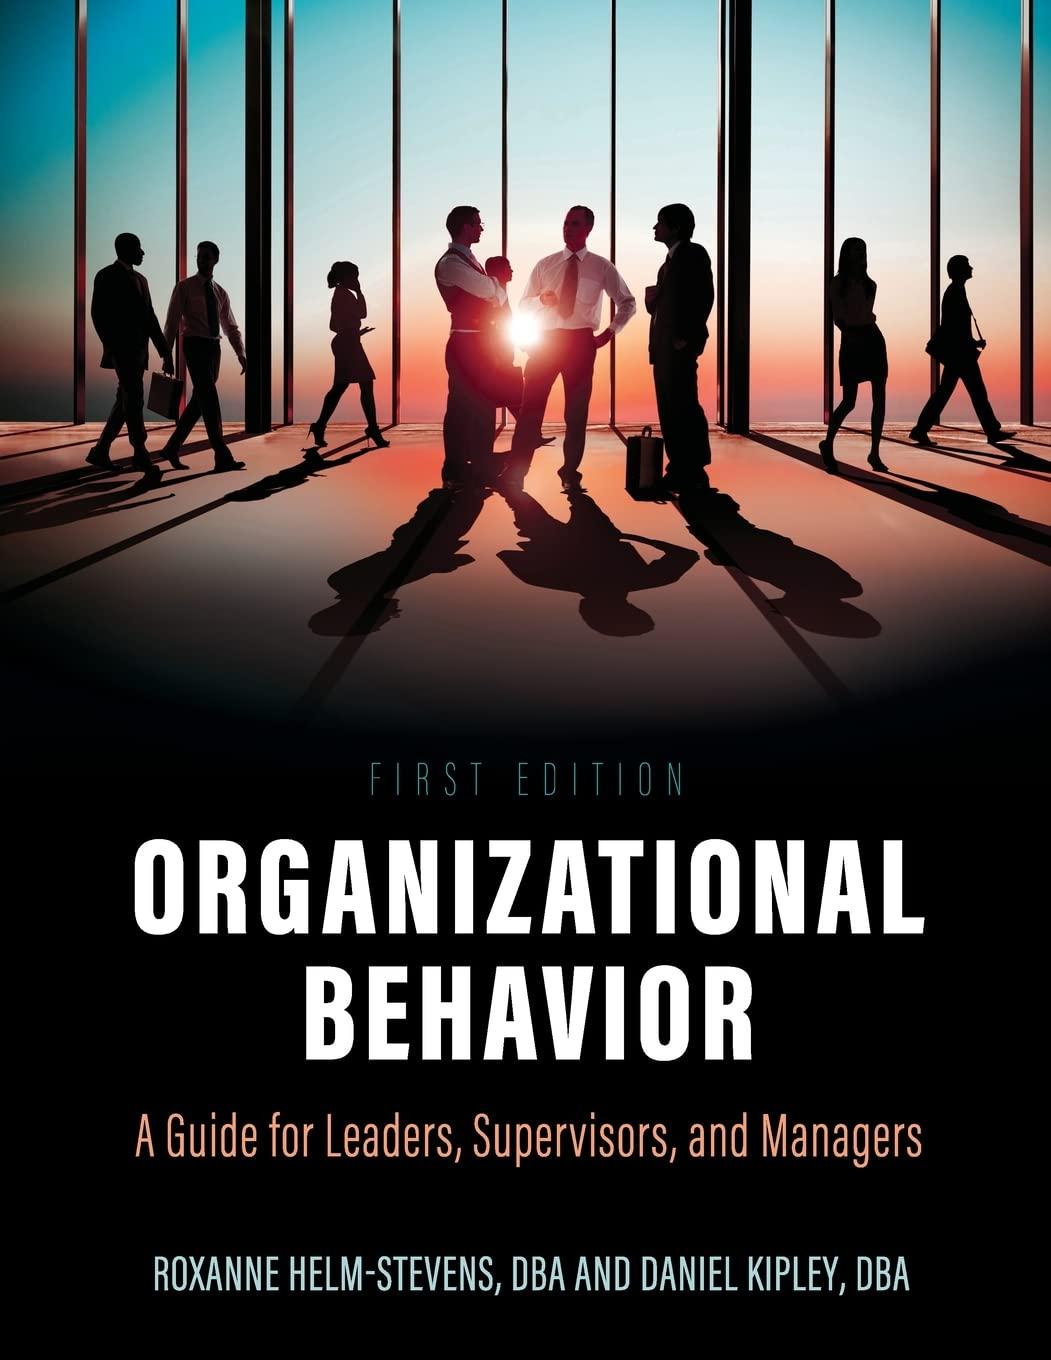 organizational behavior a guide for leaders supervisors and managers 1st edition roxanne helm stevens, daniel